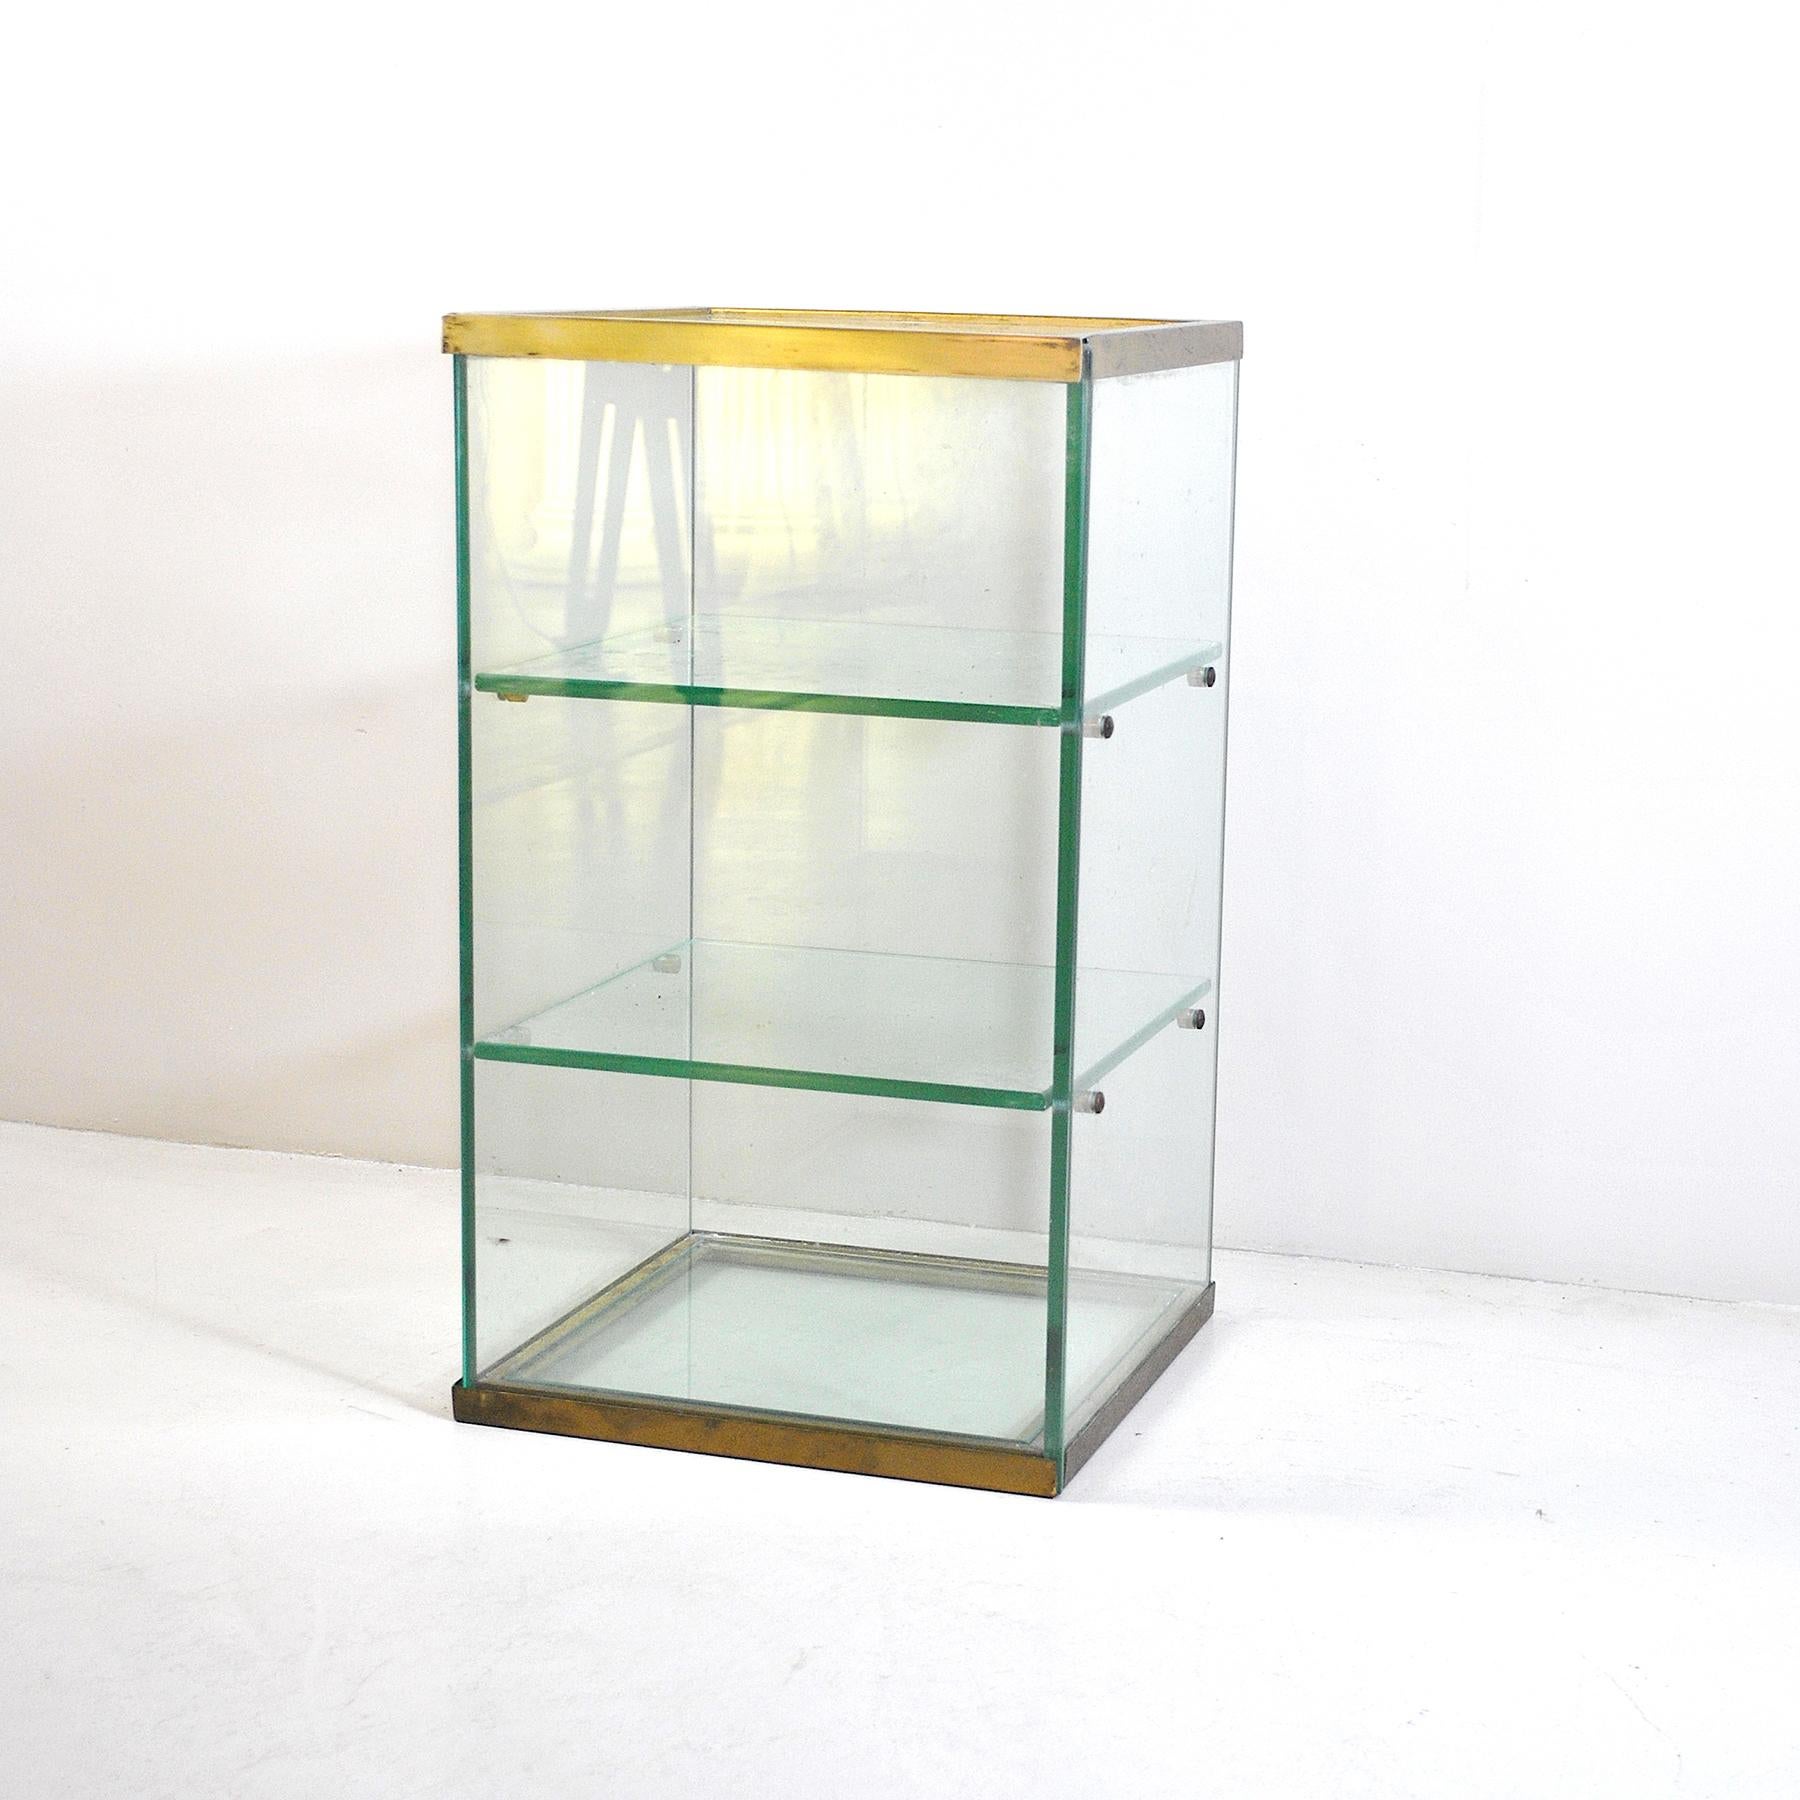 Glass display cabinet with brass structure from the 1950s.